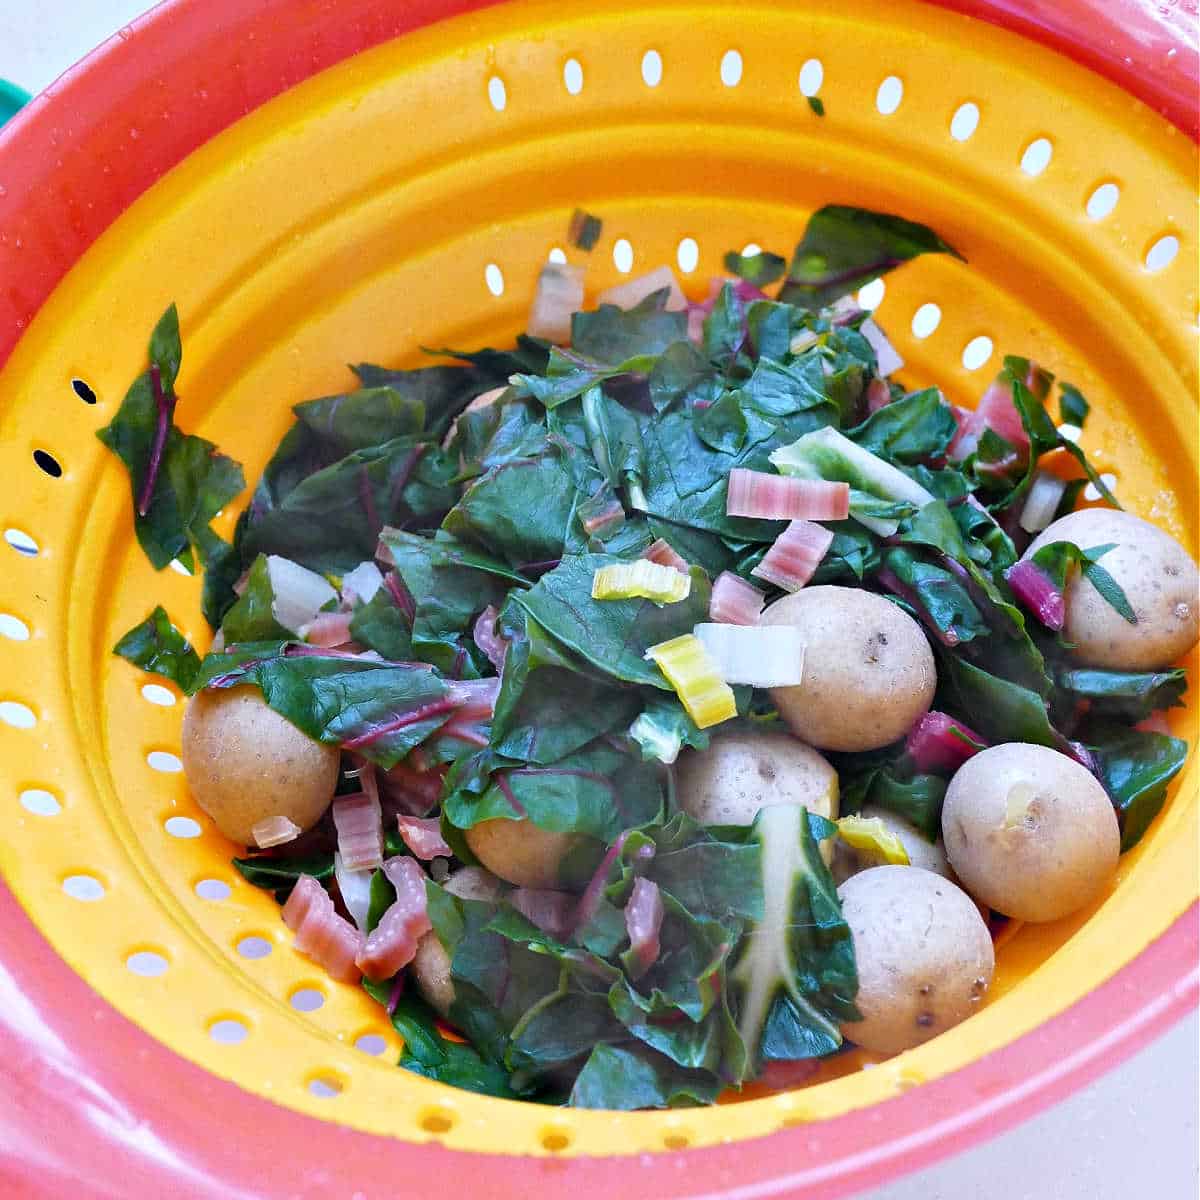 potatoes and chard being drained in a colander in a sink